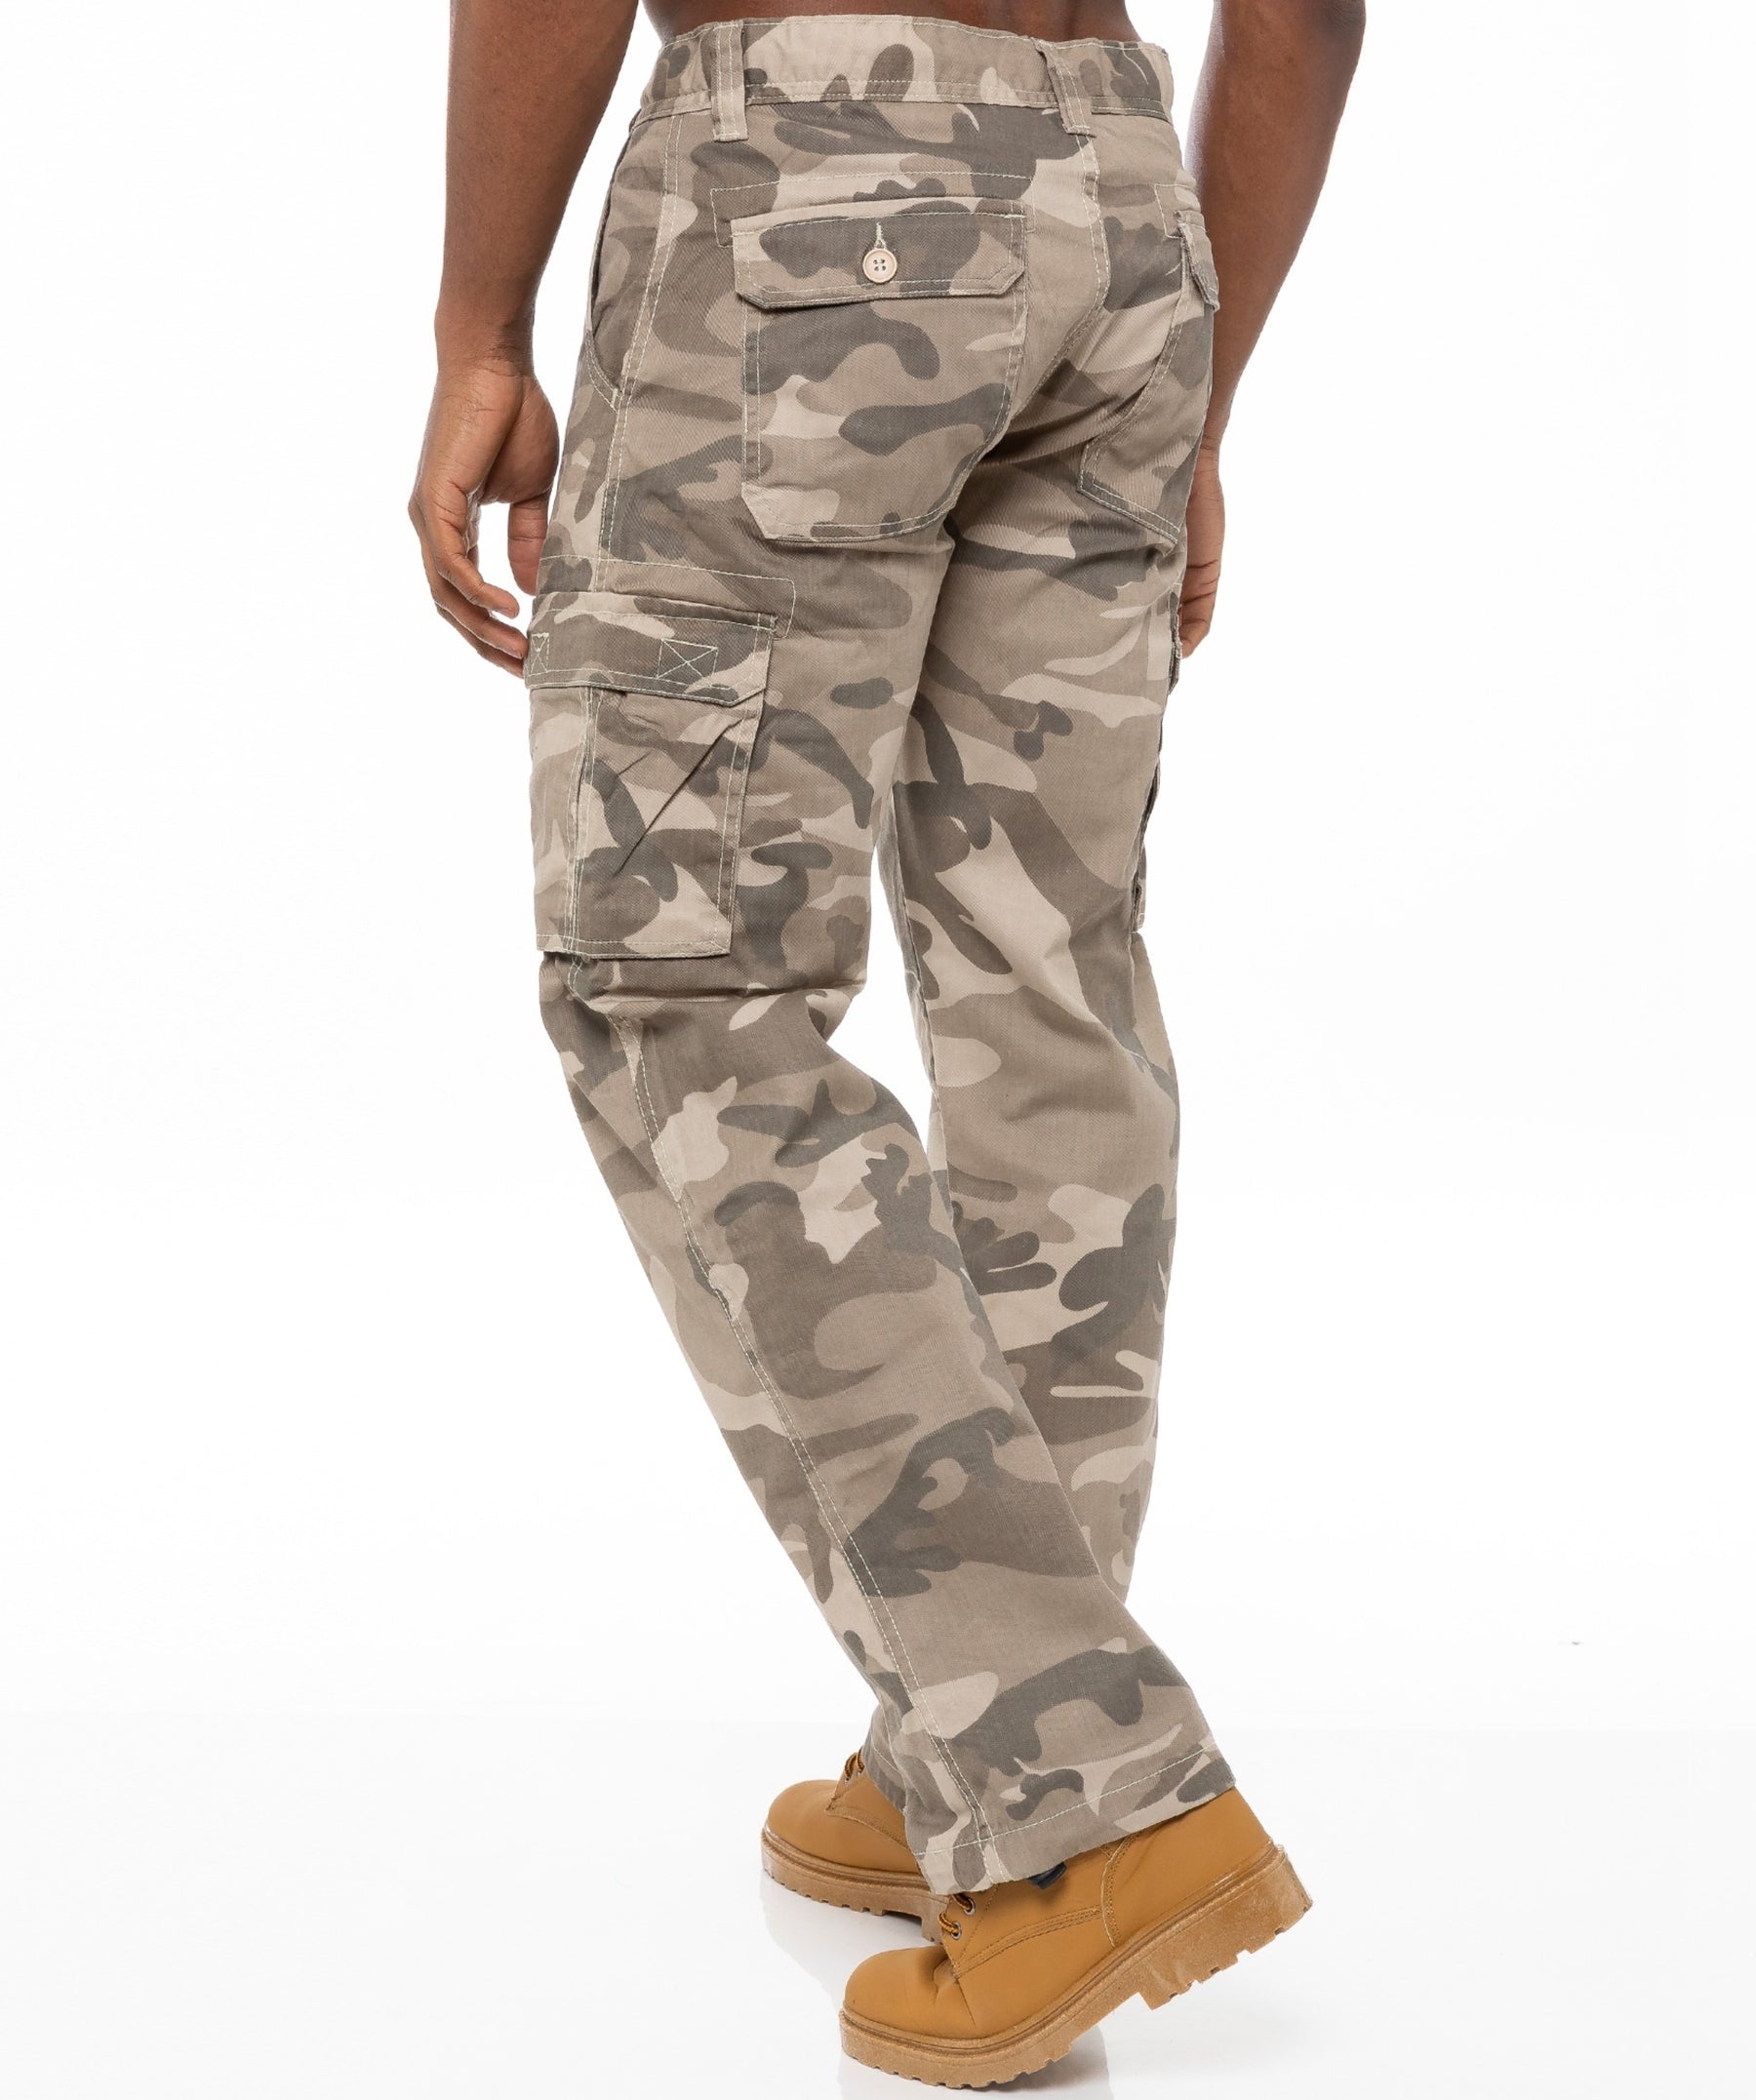 Kruze Mens Cargo Combat Trousers Army Camouflage Camo Military Pants All  Waists | eBay